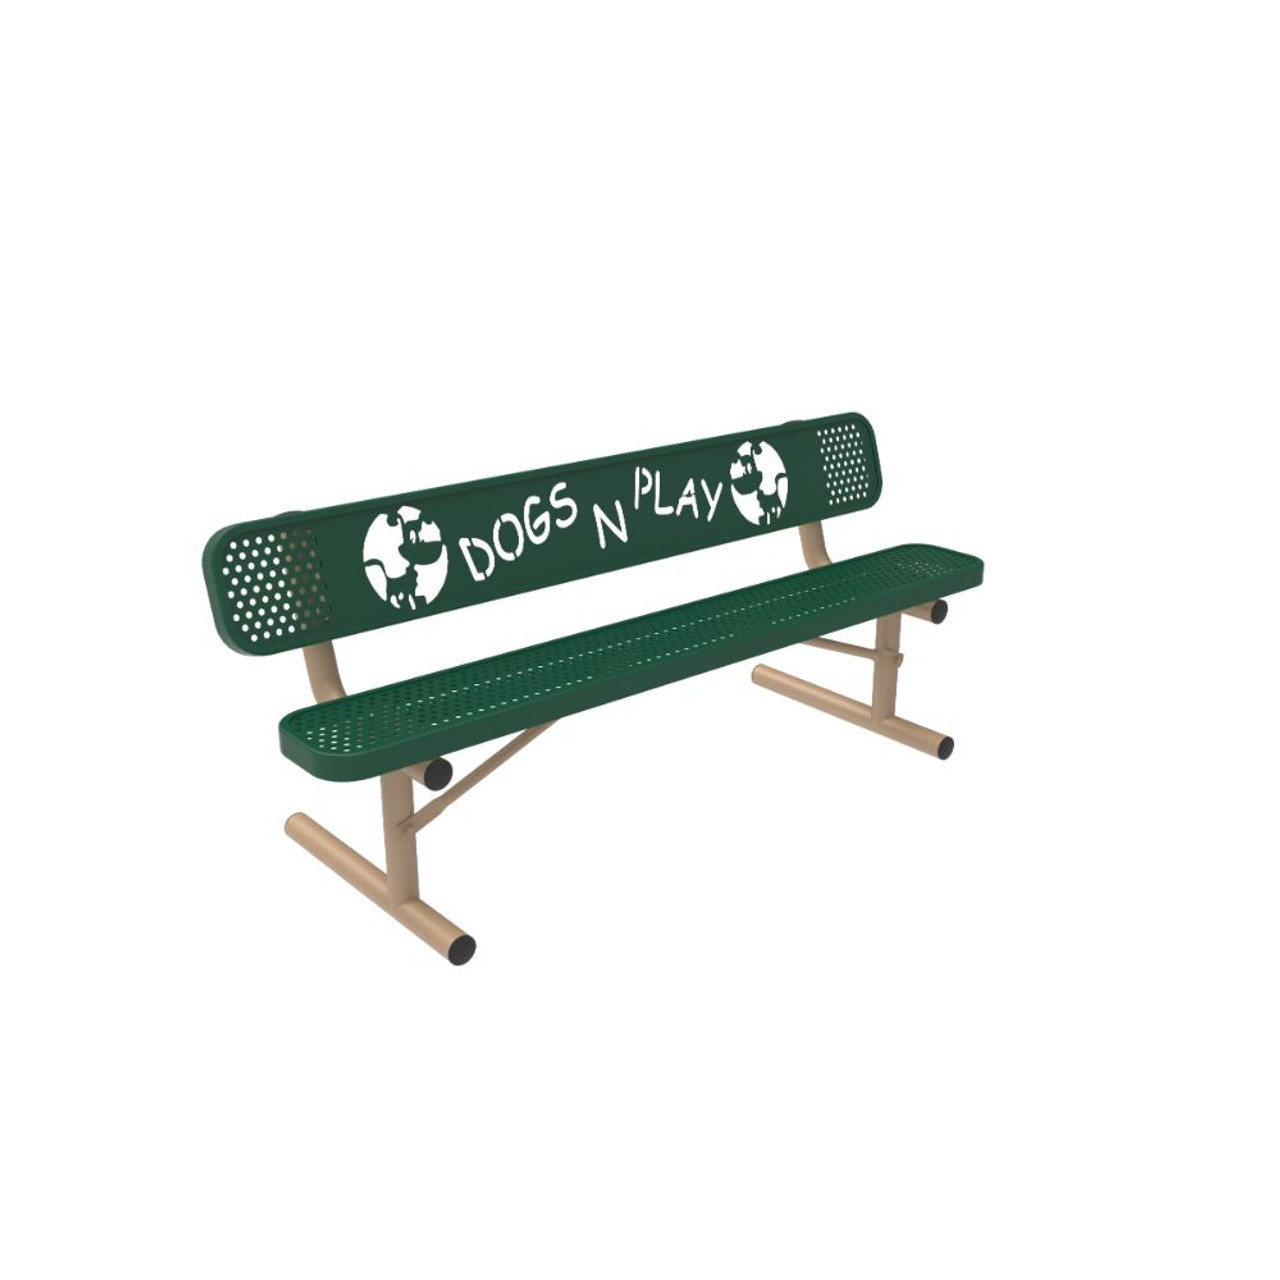 Metal Bench for dog park with portable base - green seat